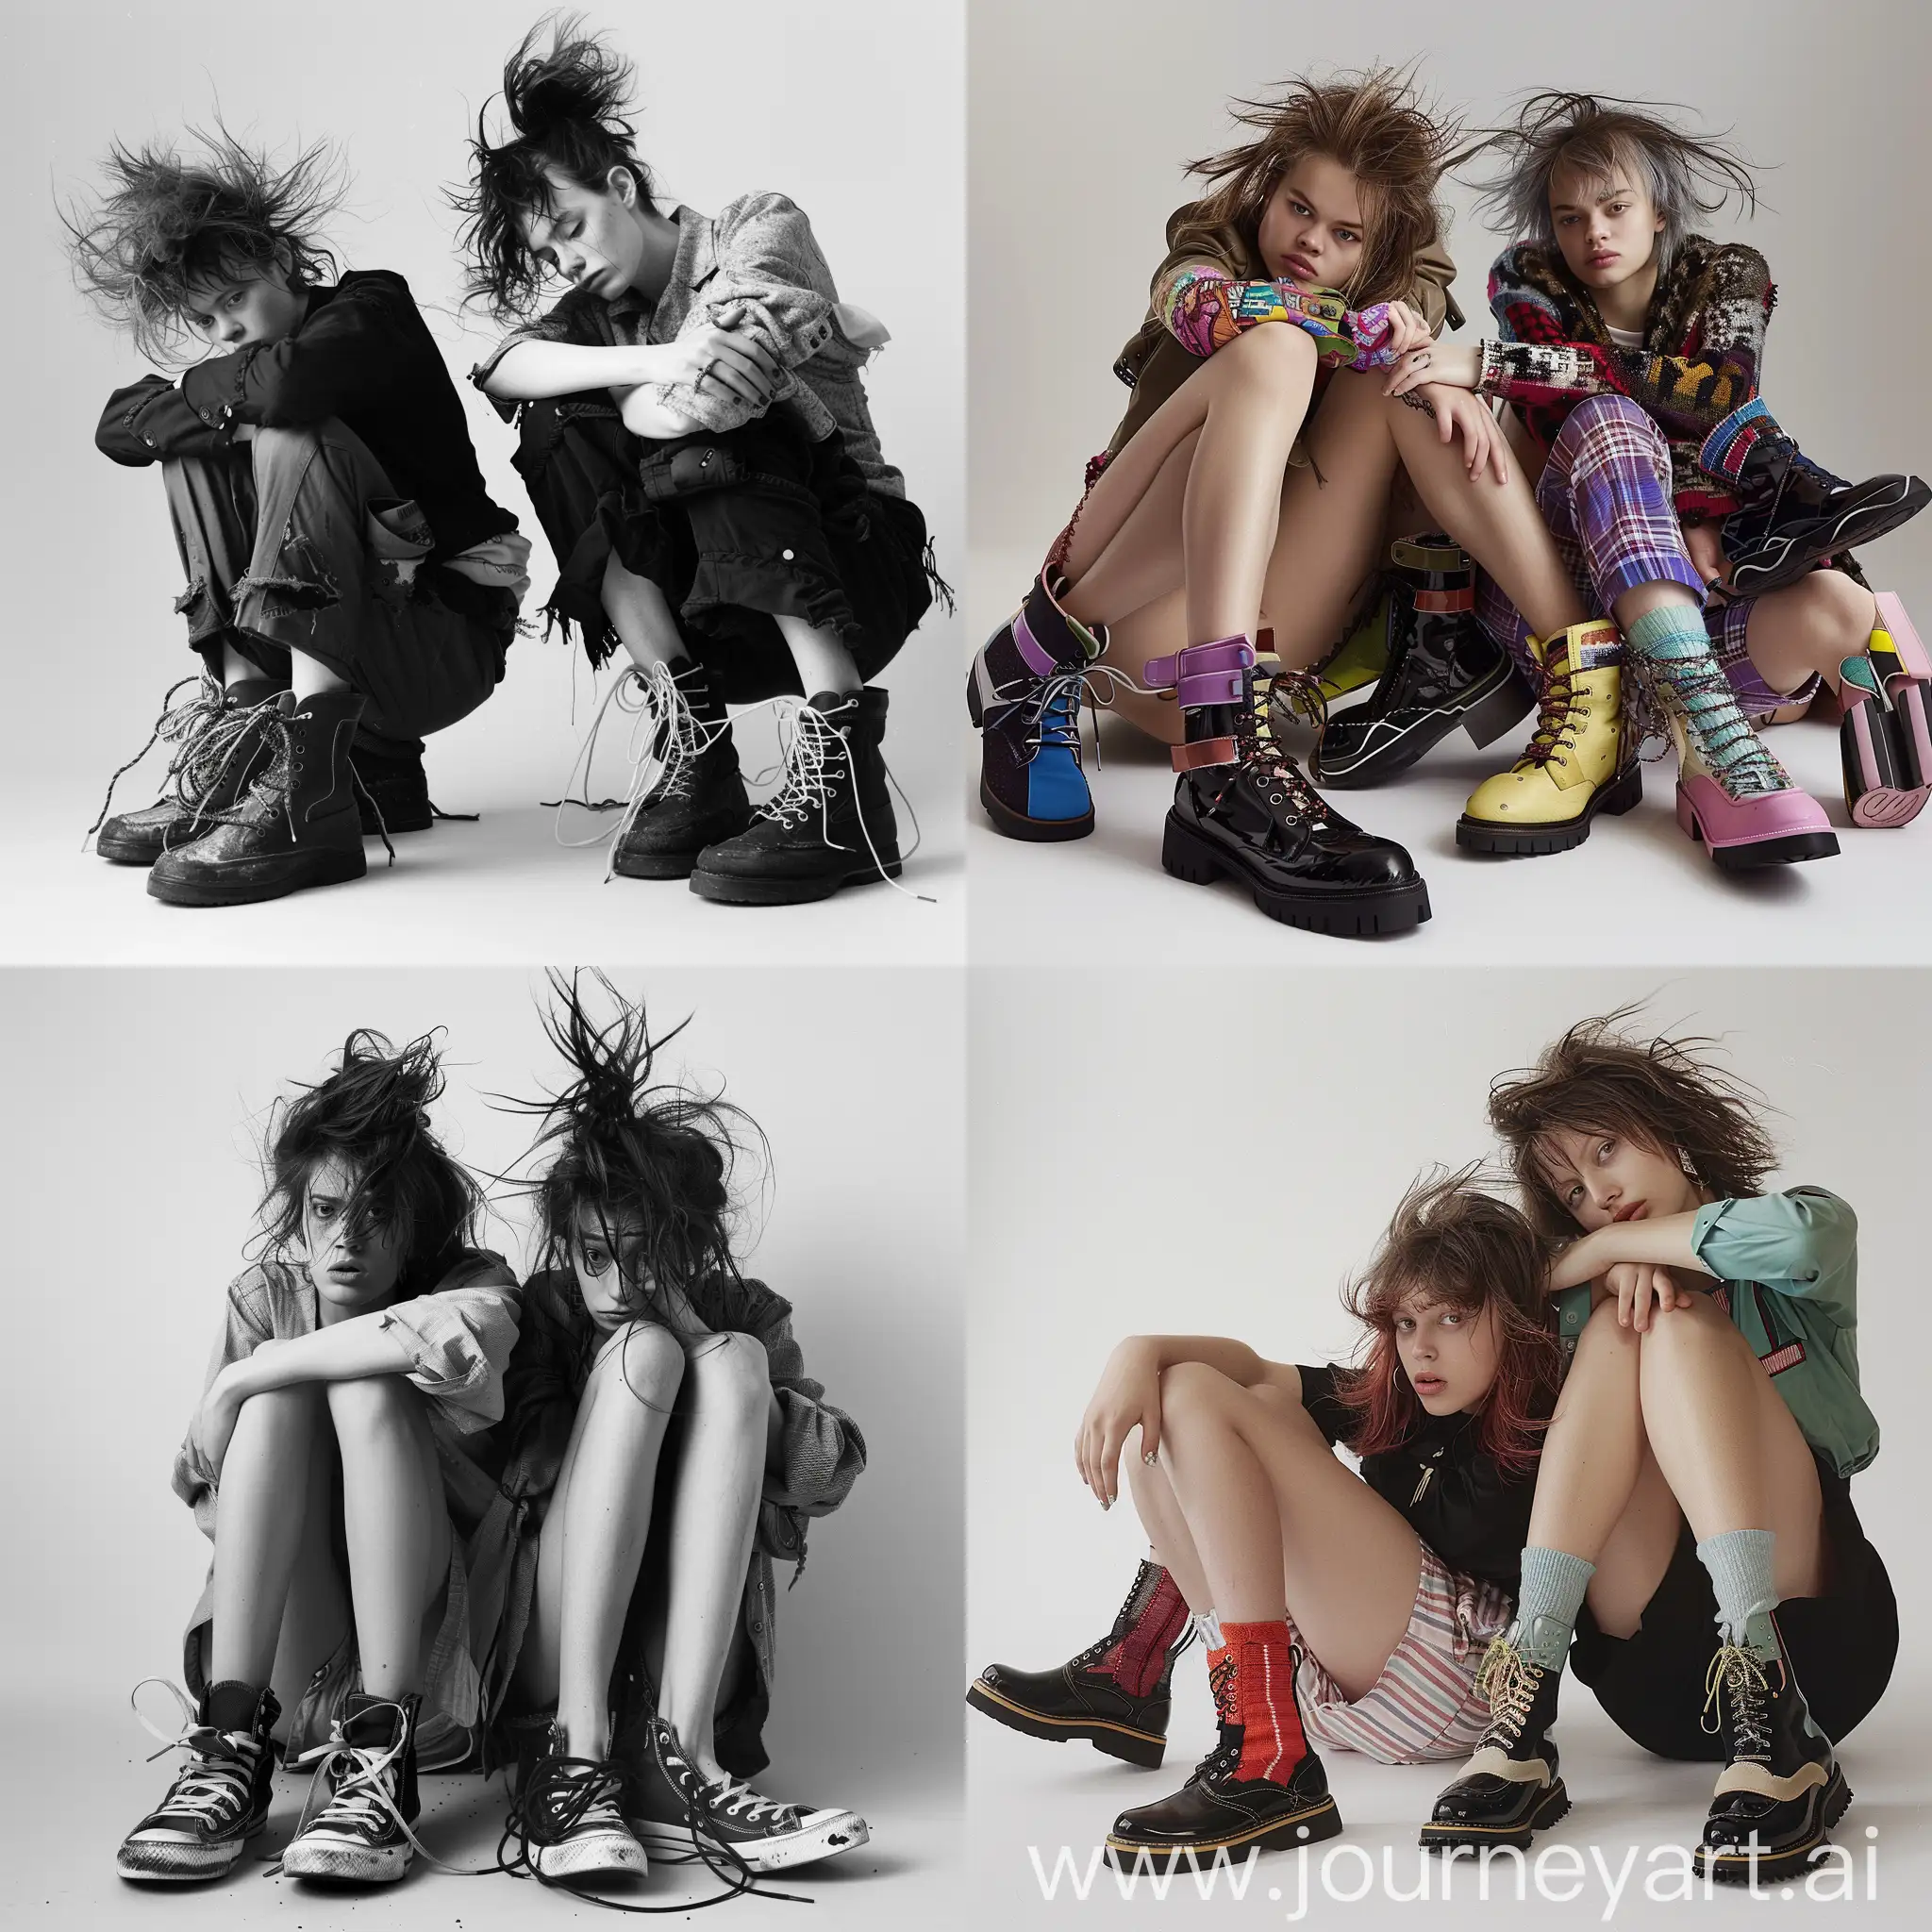 Mismatched-Shoes-Women-with-Disheveled-Hair-Crossing-Legs